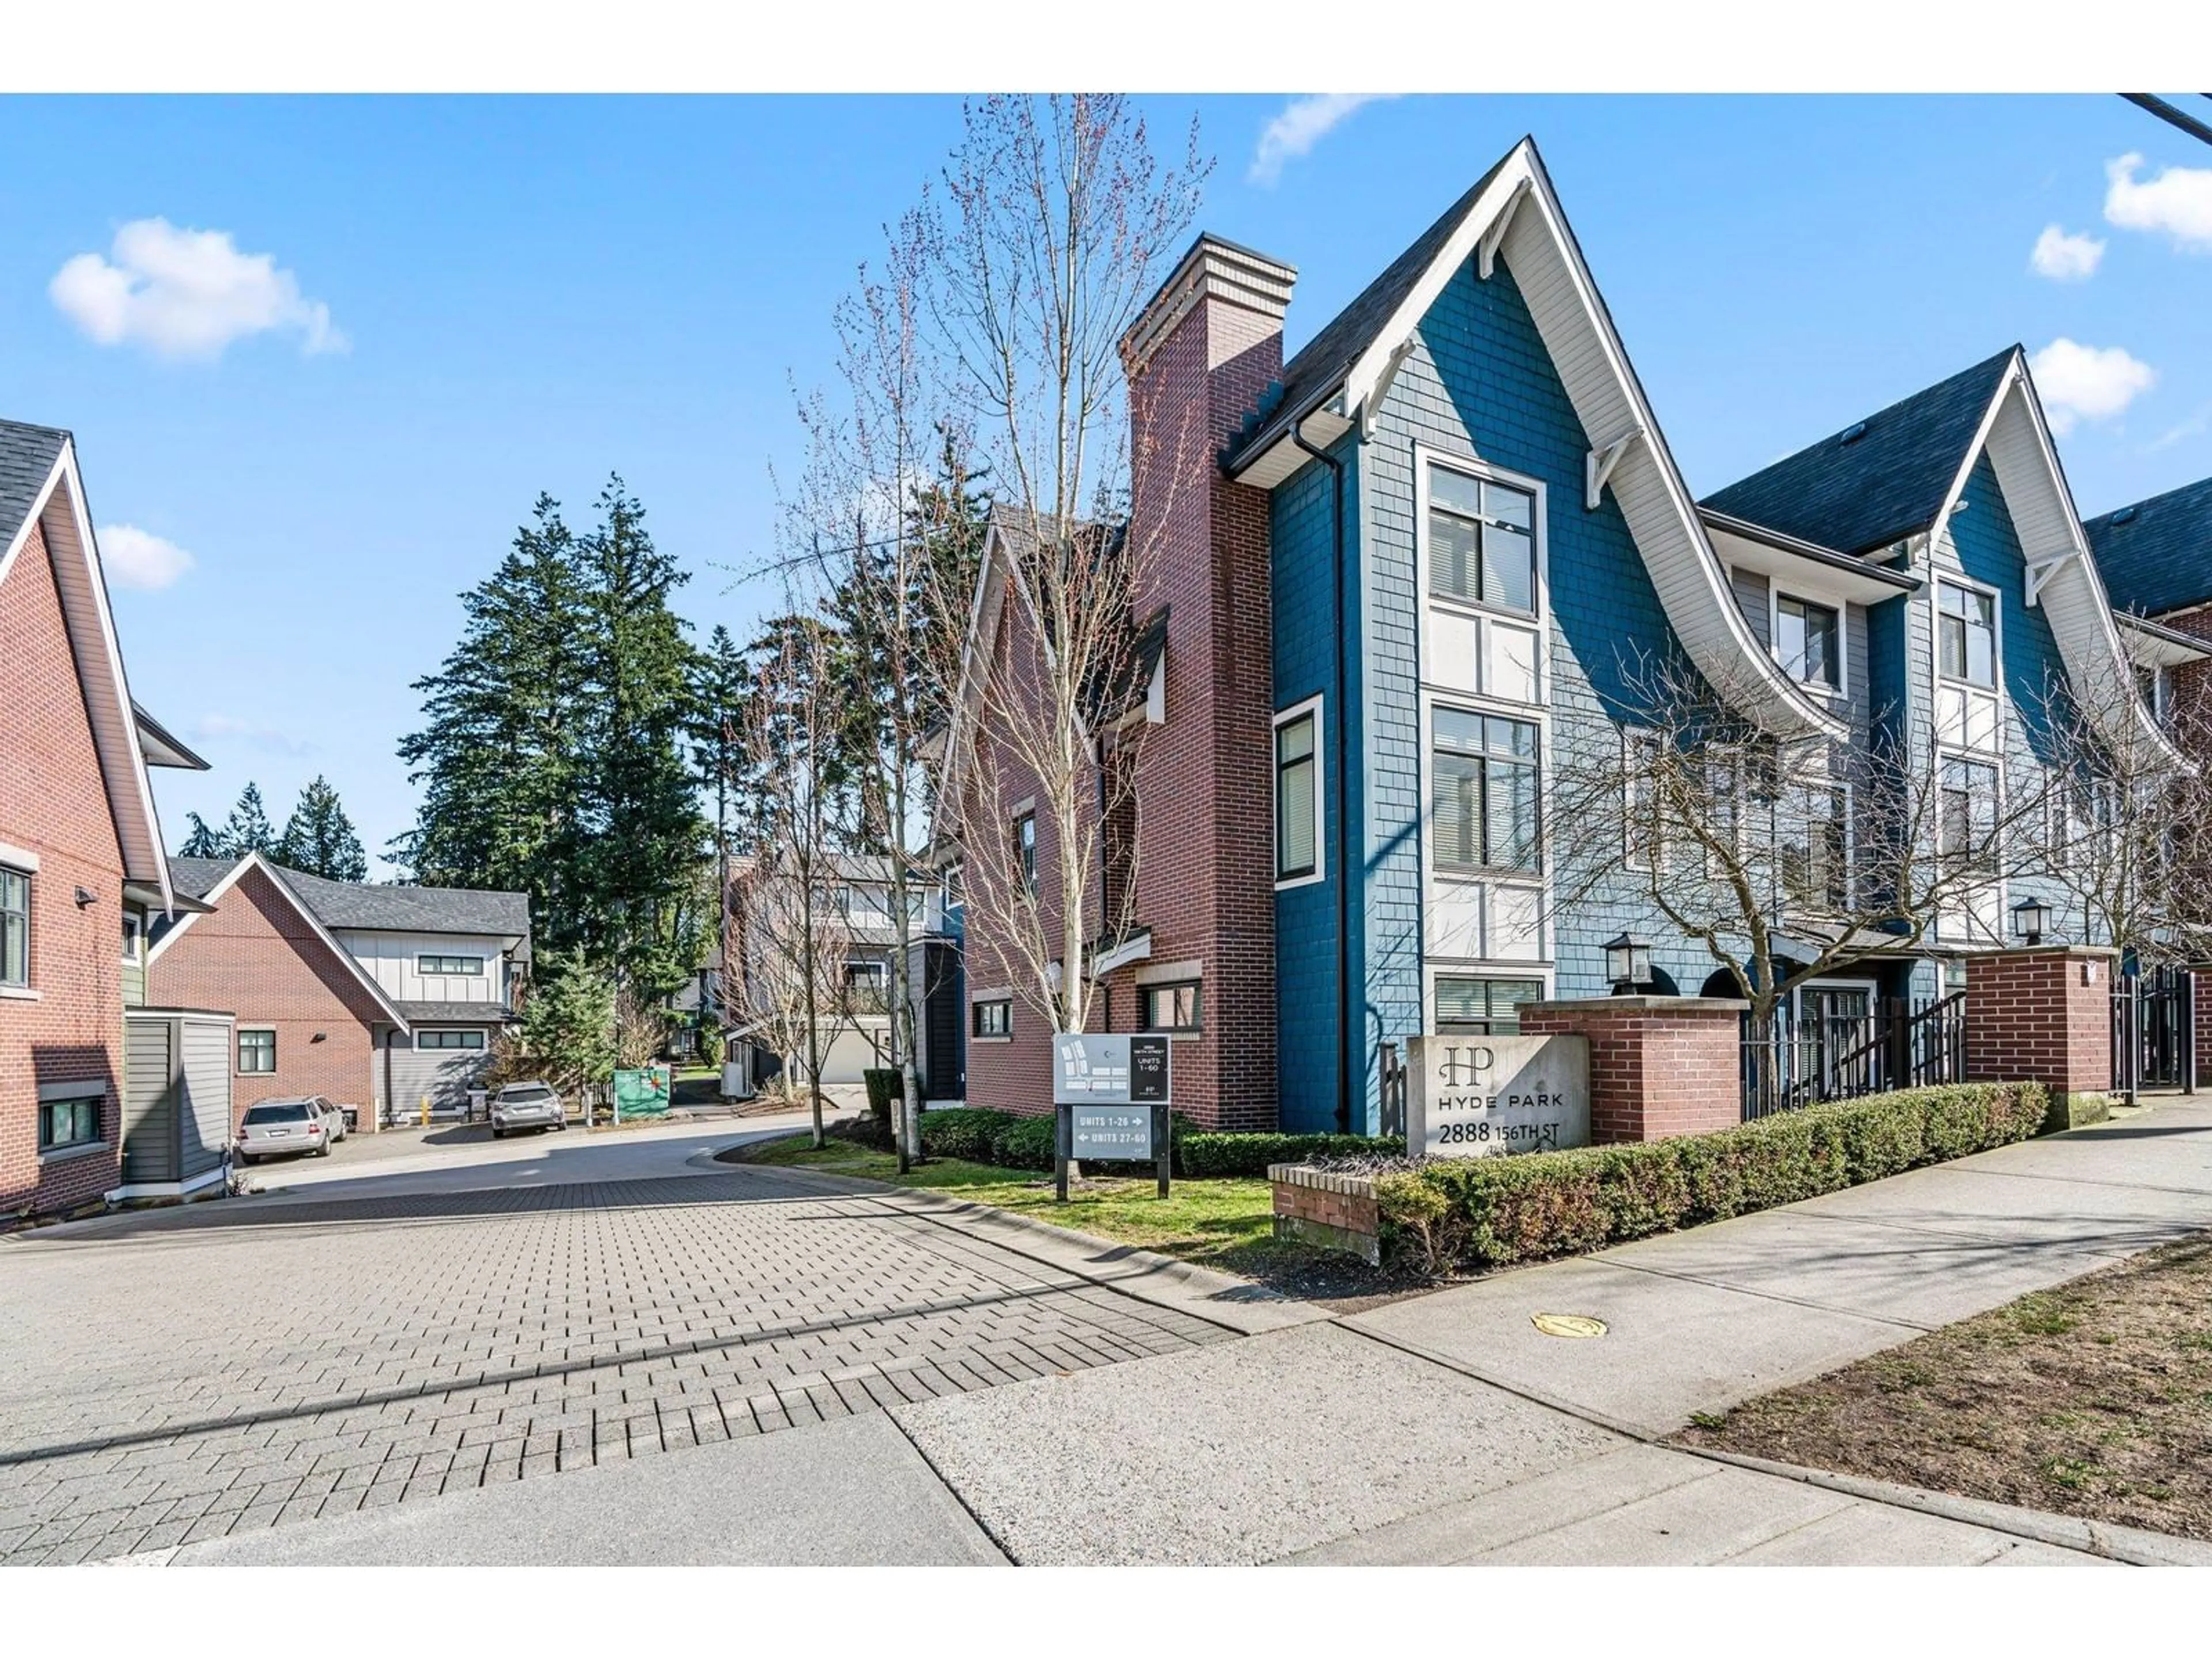 A pic from exterior of the house or condo for 9 2888 156 STREET, Surrey British Columbia V3Z0C7